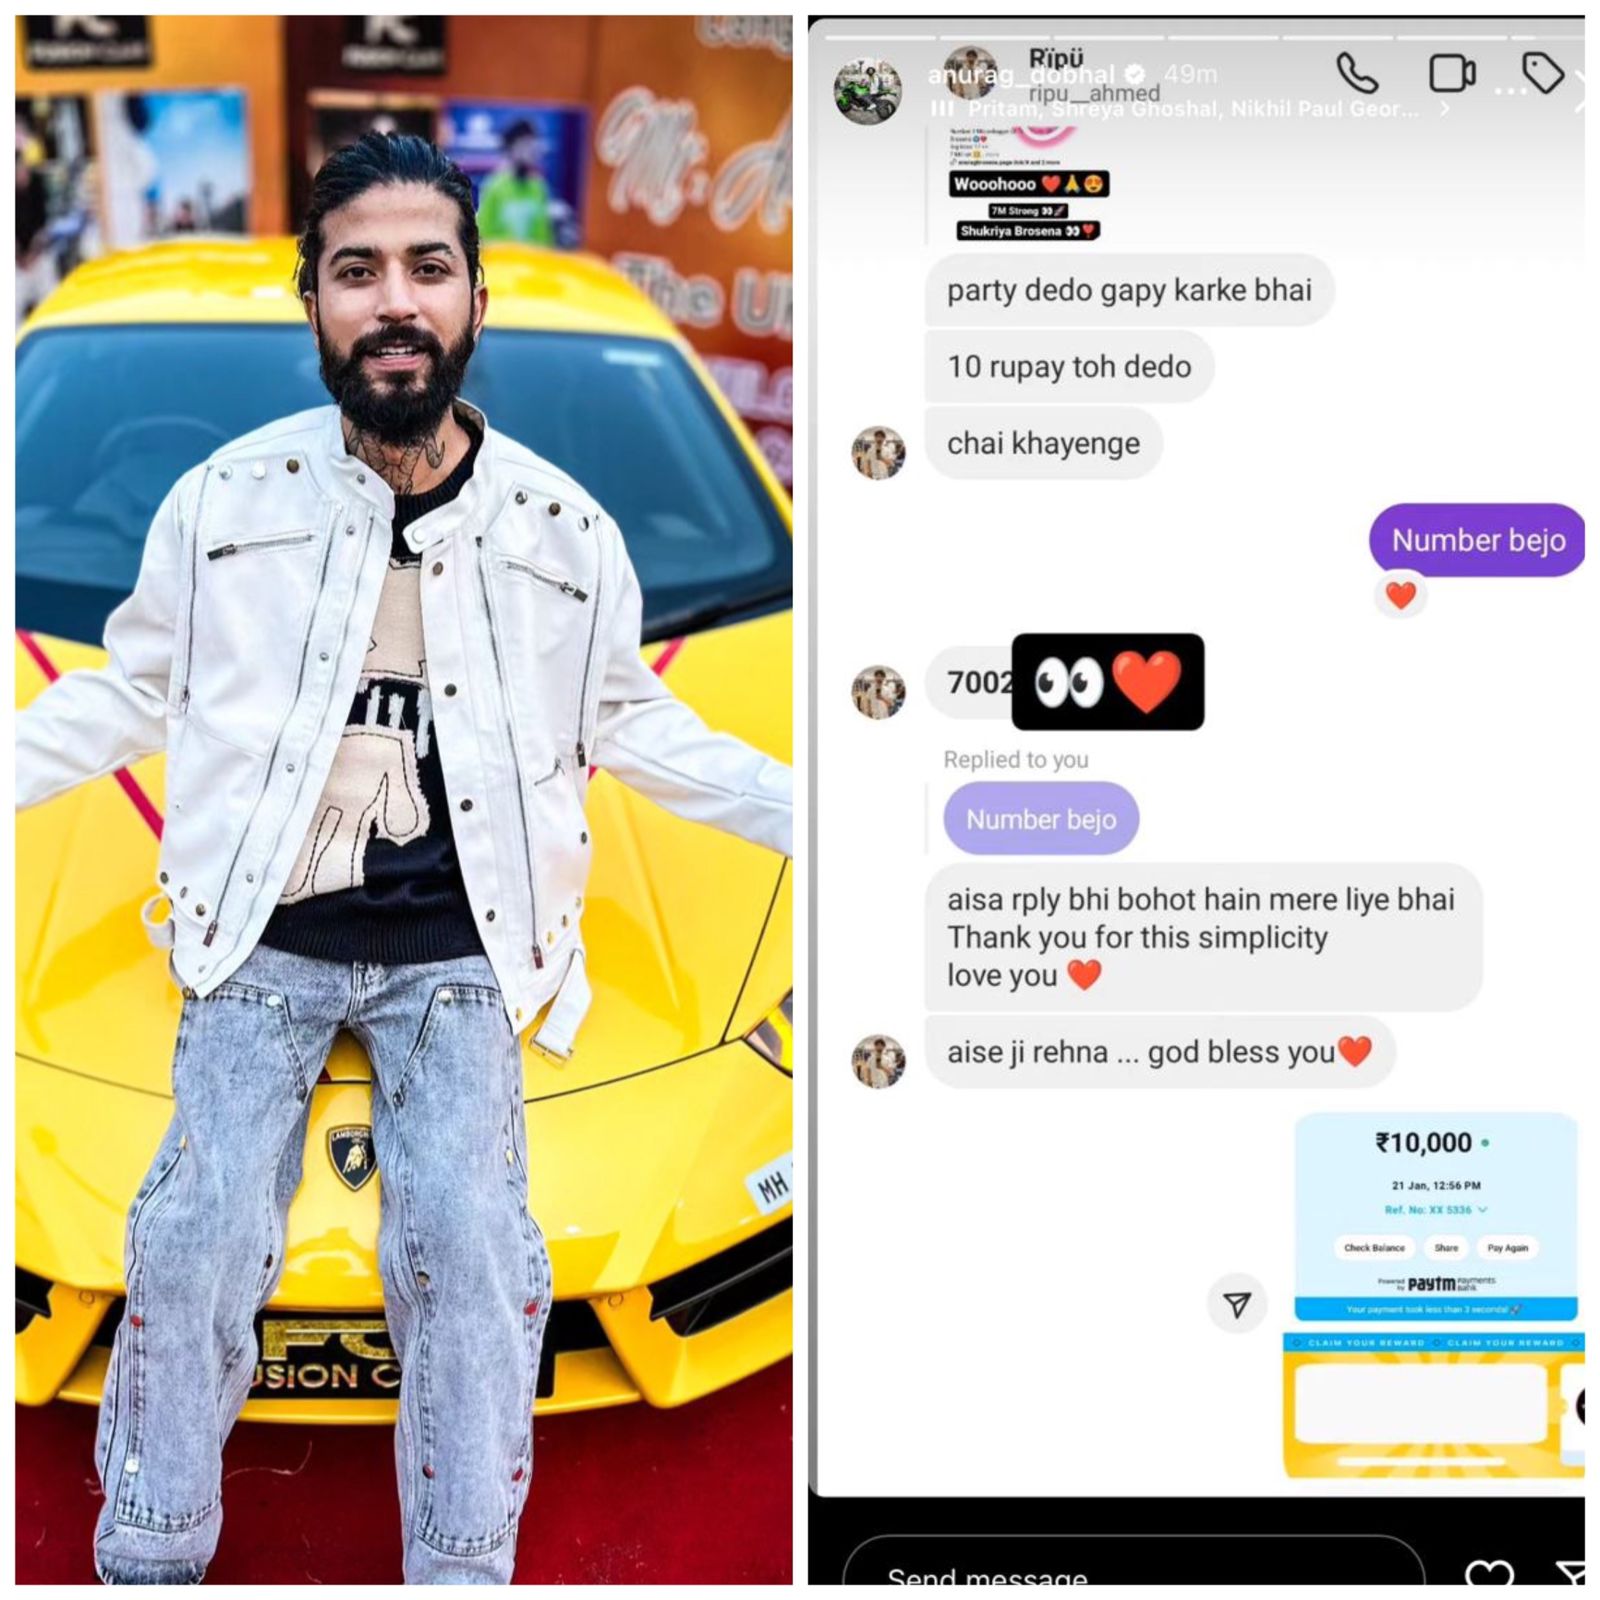 Anurag Dobhal Heartfelt Gesture: From 7M Followers to a ₹10,000 Surprise for a Dedicated Fan